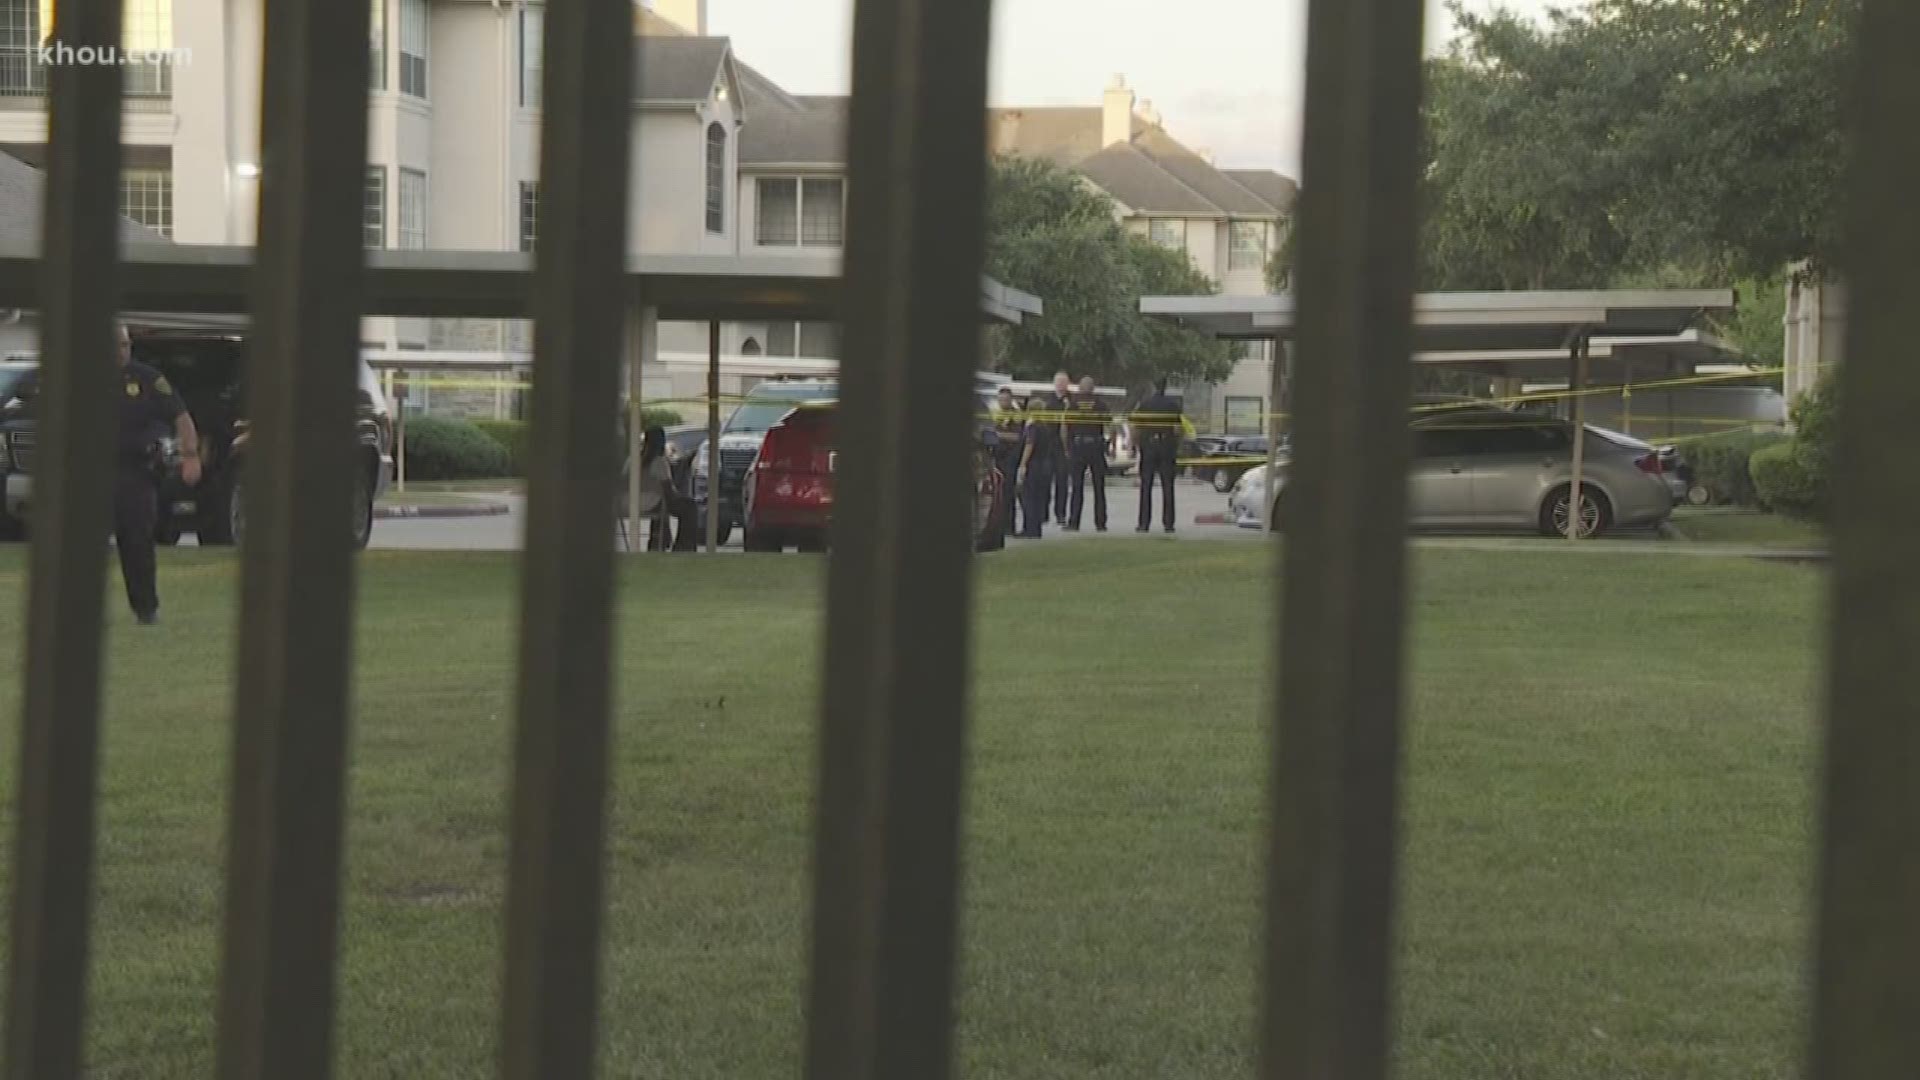 A man is dead after a stabbing at an apartment complex in west Houston. Police responded to the scene in the 1300 block of Eldridge Parkway, where they say a man was stabbed in the chest with a kitchen knife.